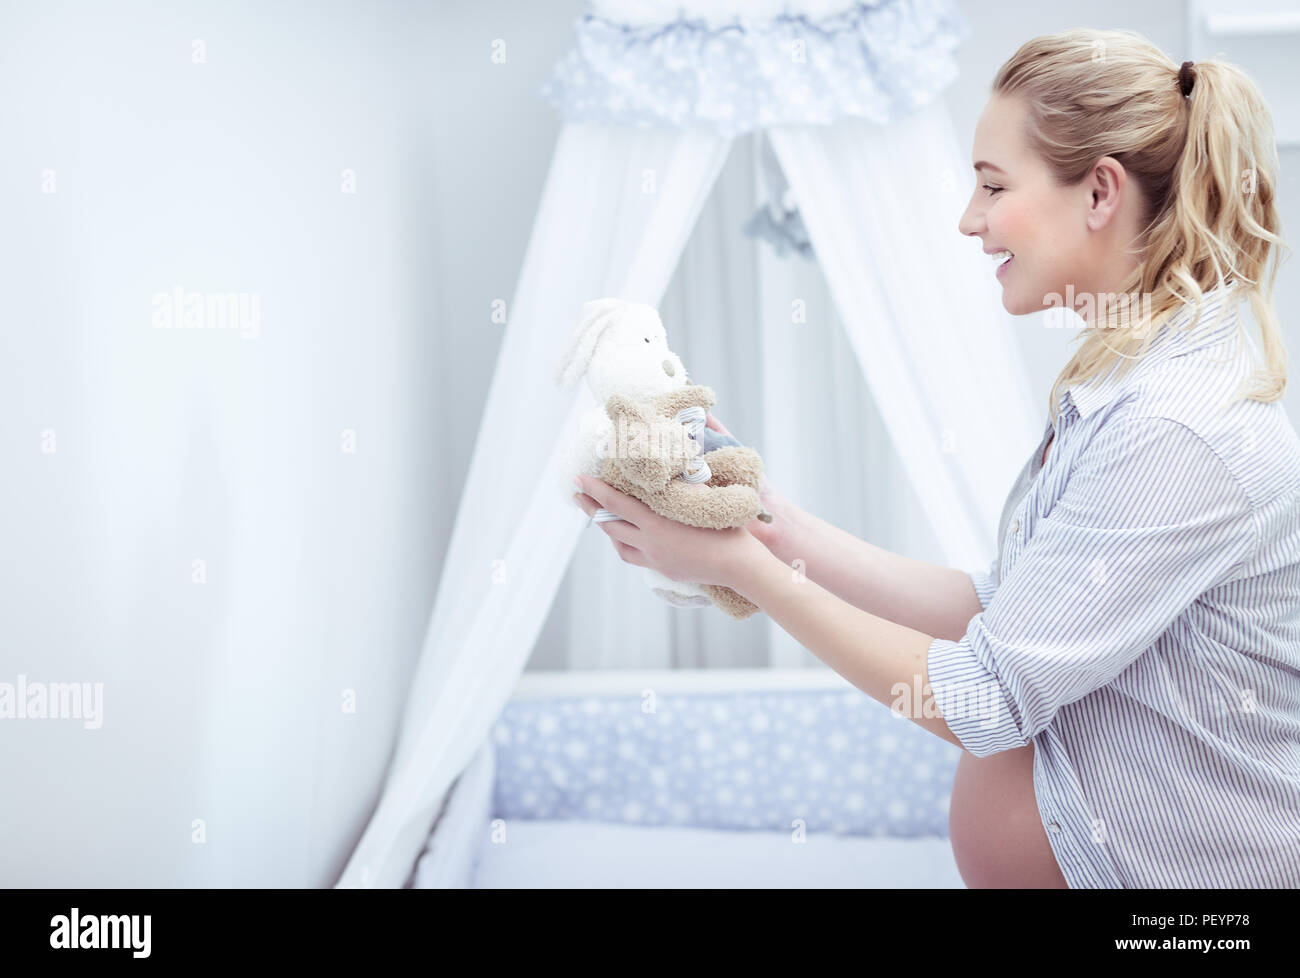 Happy mother prepares child's room, beautiful young pregnant woman with pleasure decorates bed of her future baby with toys, happy pregnancy concept Stock Photo